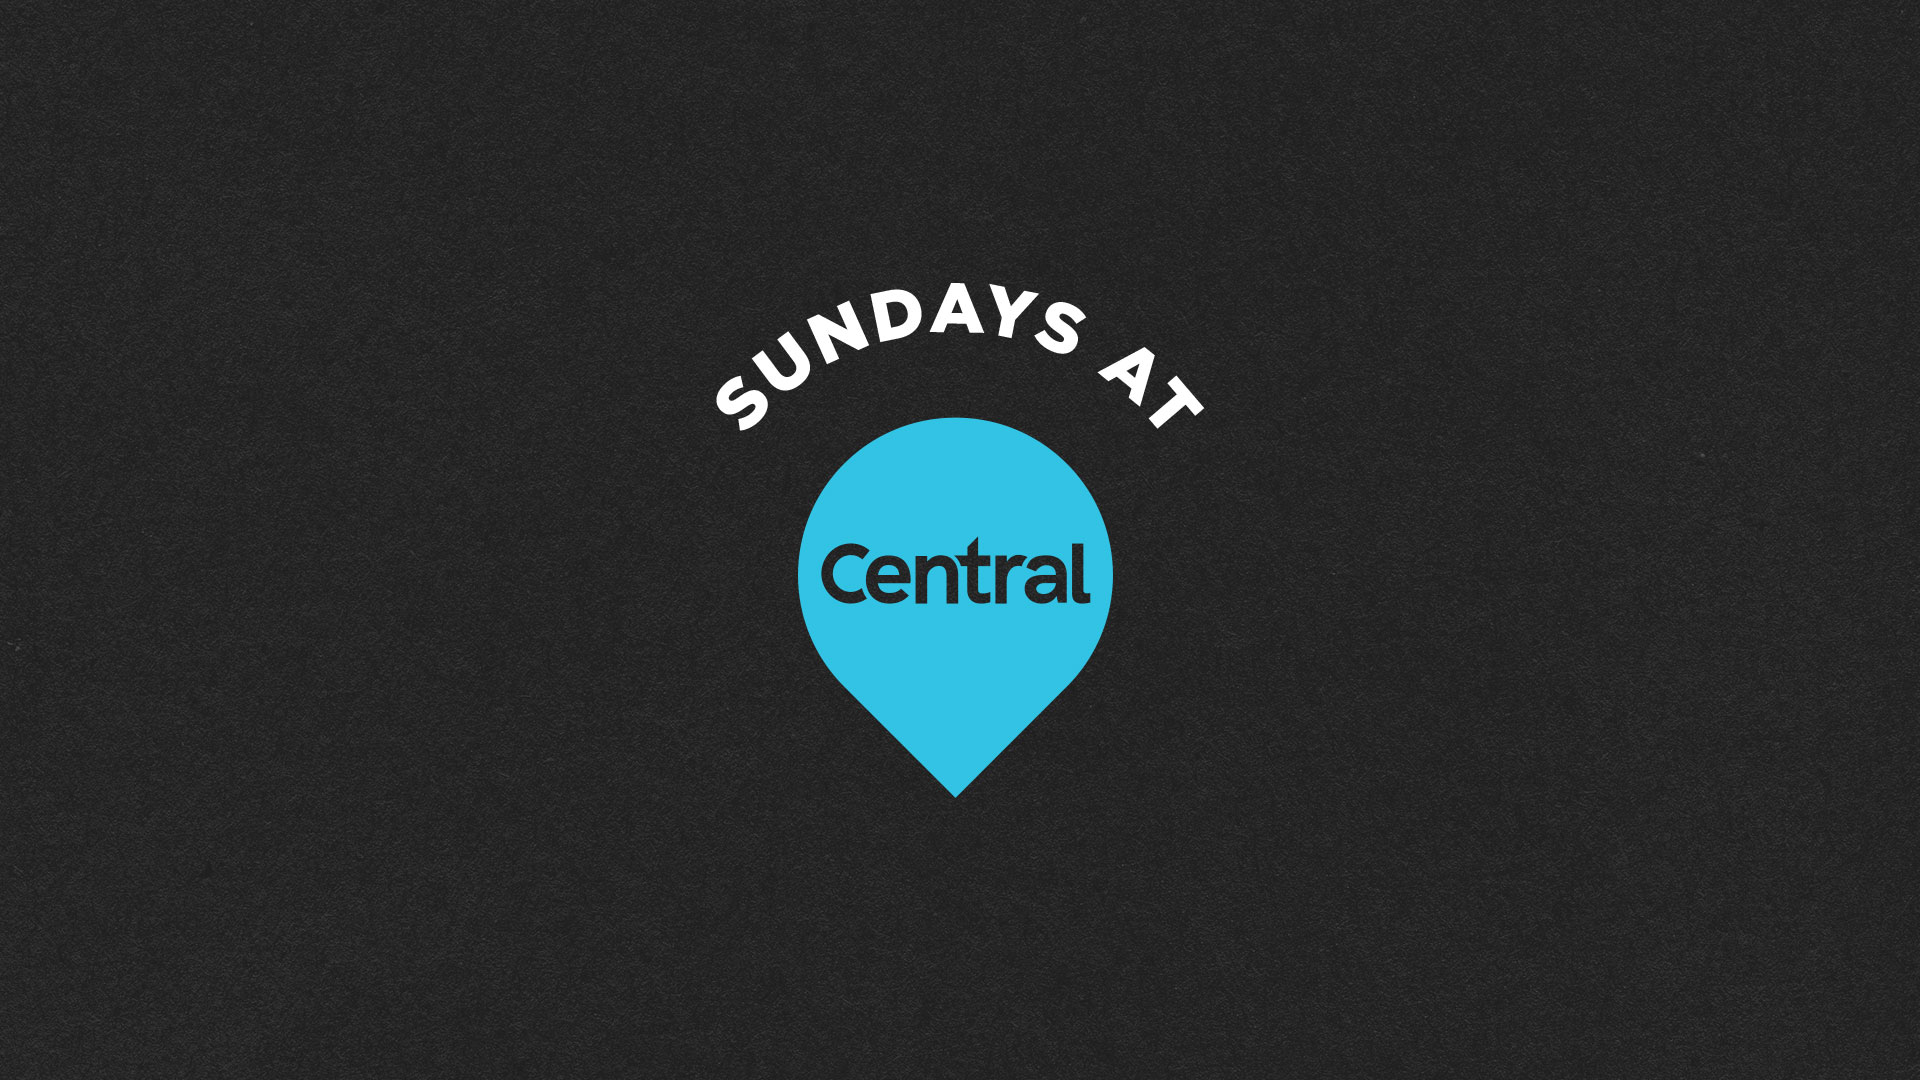   Sundays at Central